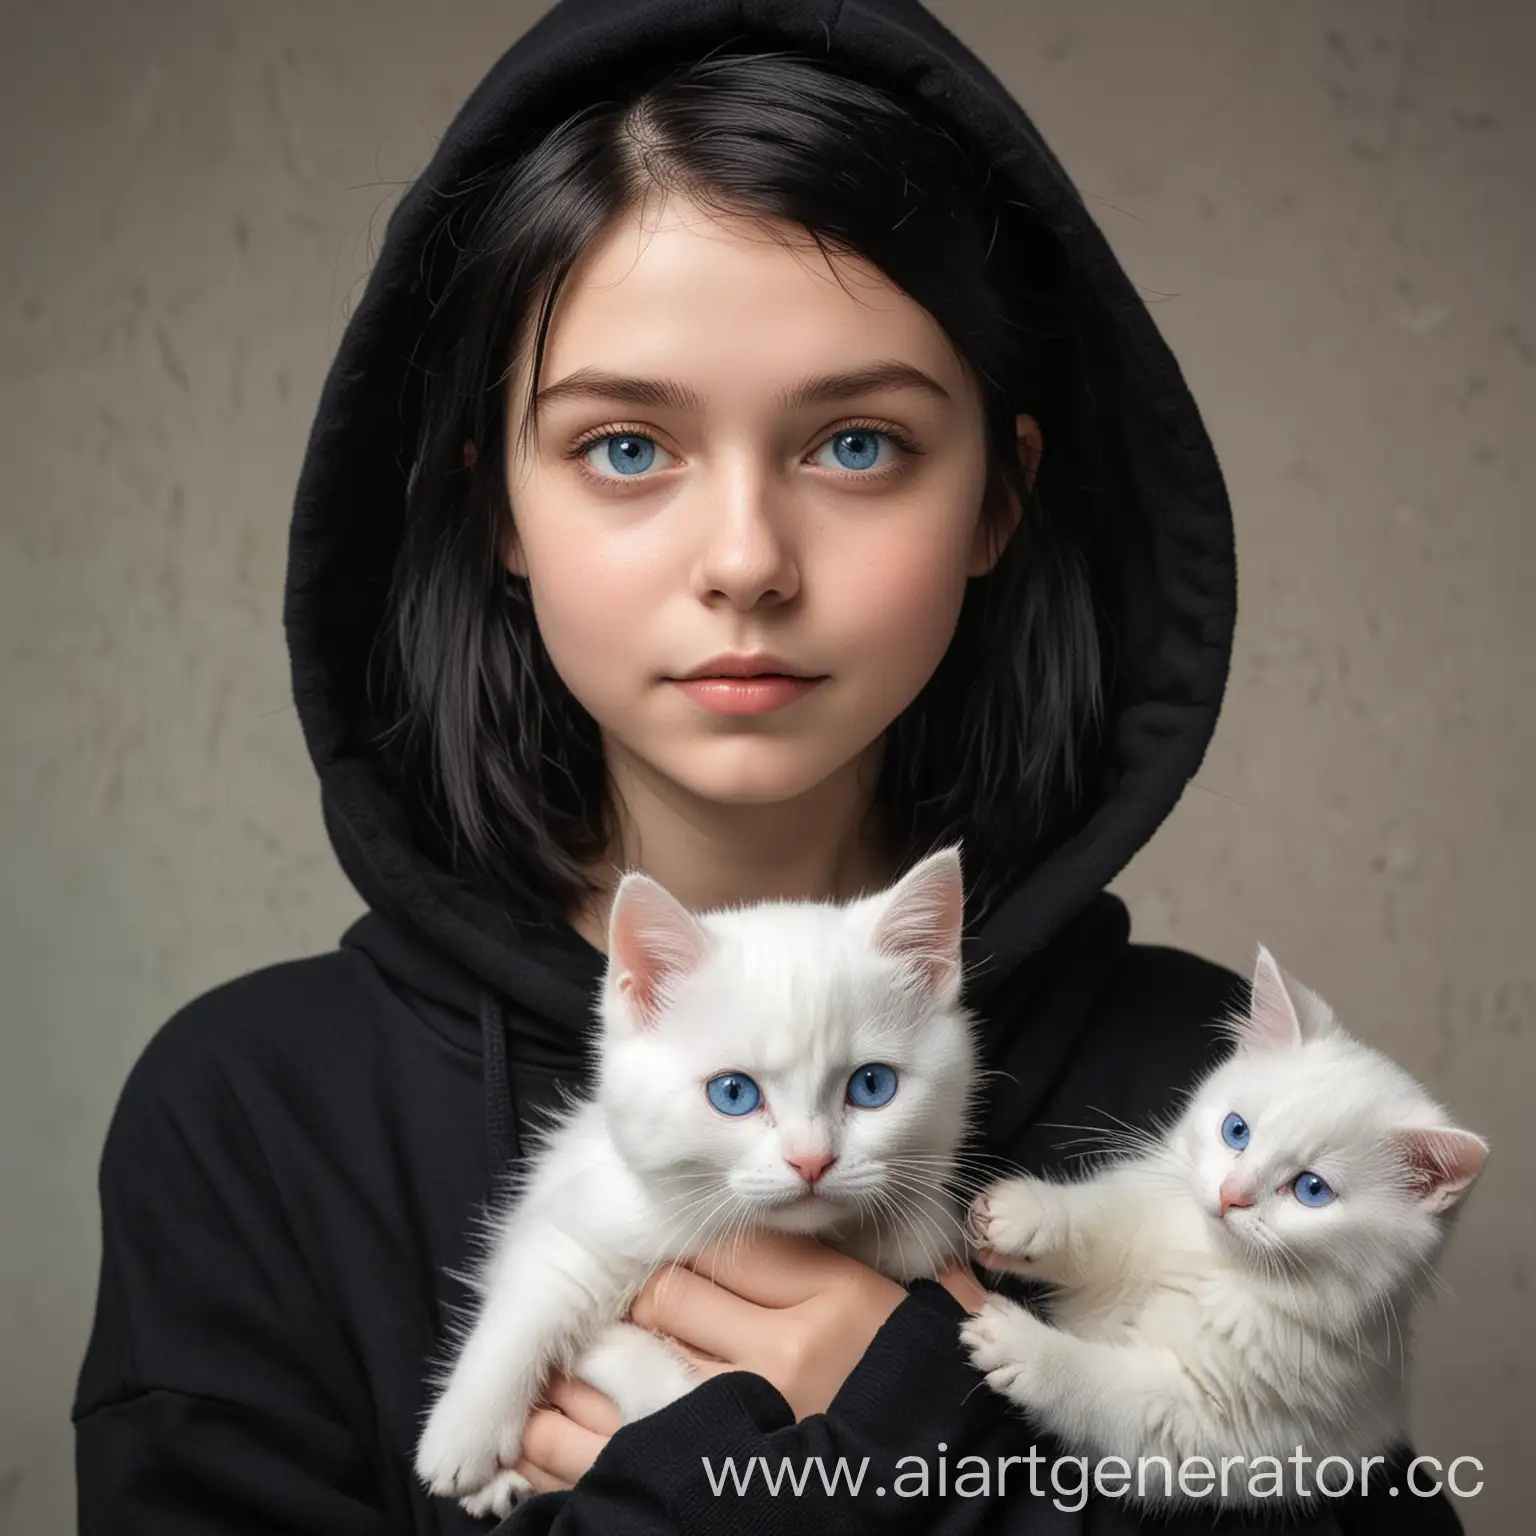 Girl-in-Black-Hoodie-Holding-Goose-near-White-Cat-with-Blue-Eyes